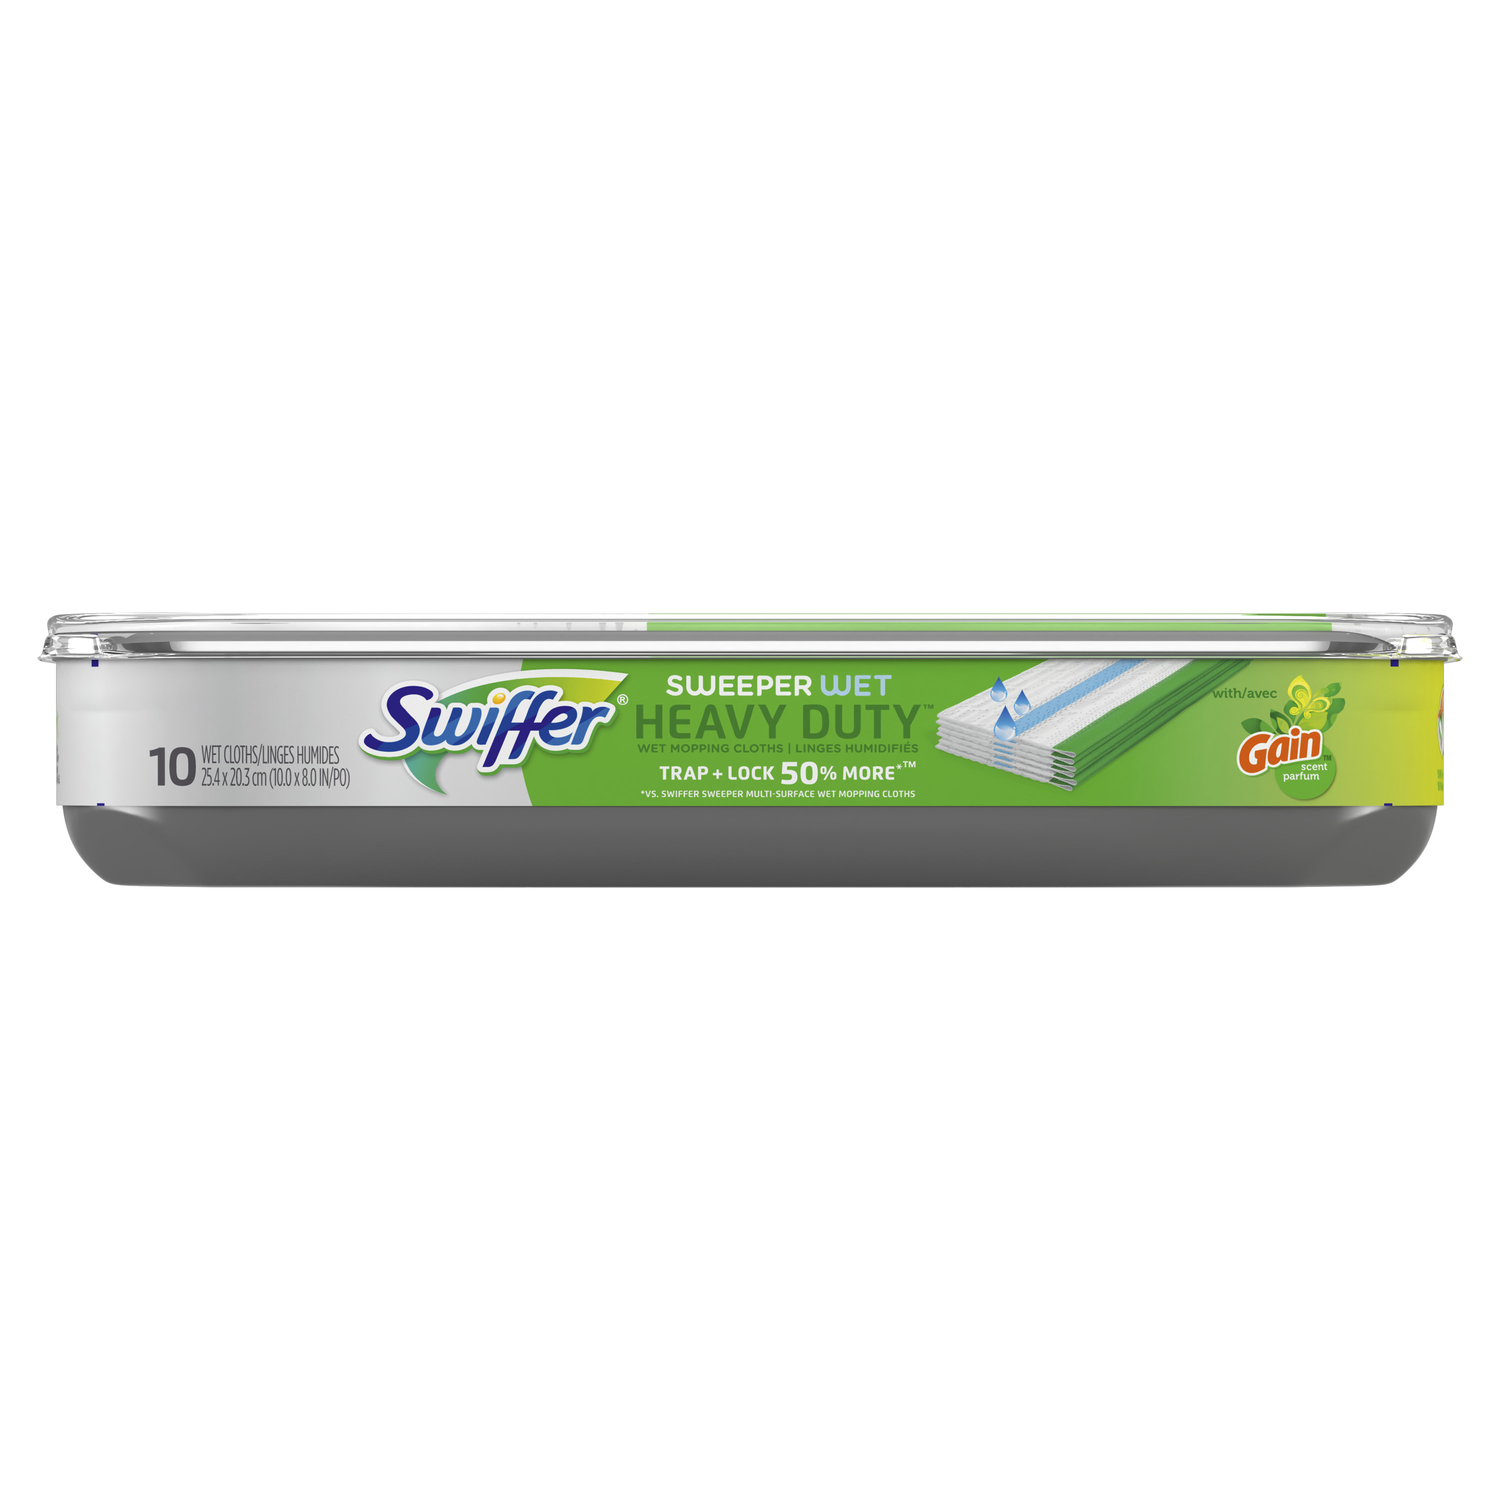 UPC 037000764717 product image for Swiffer SweeperWet Heavy Duty 10 in. W x 8 in. L Cloth Refill Pad 10 count | upcitemdb.com